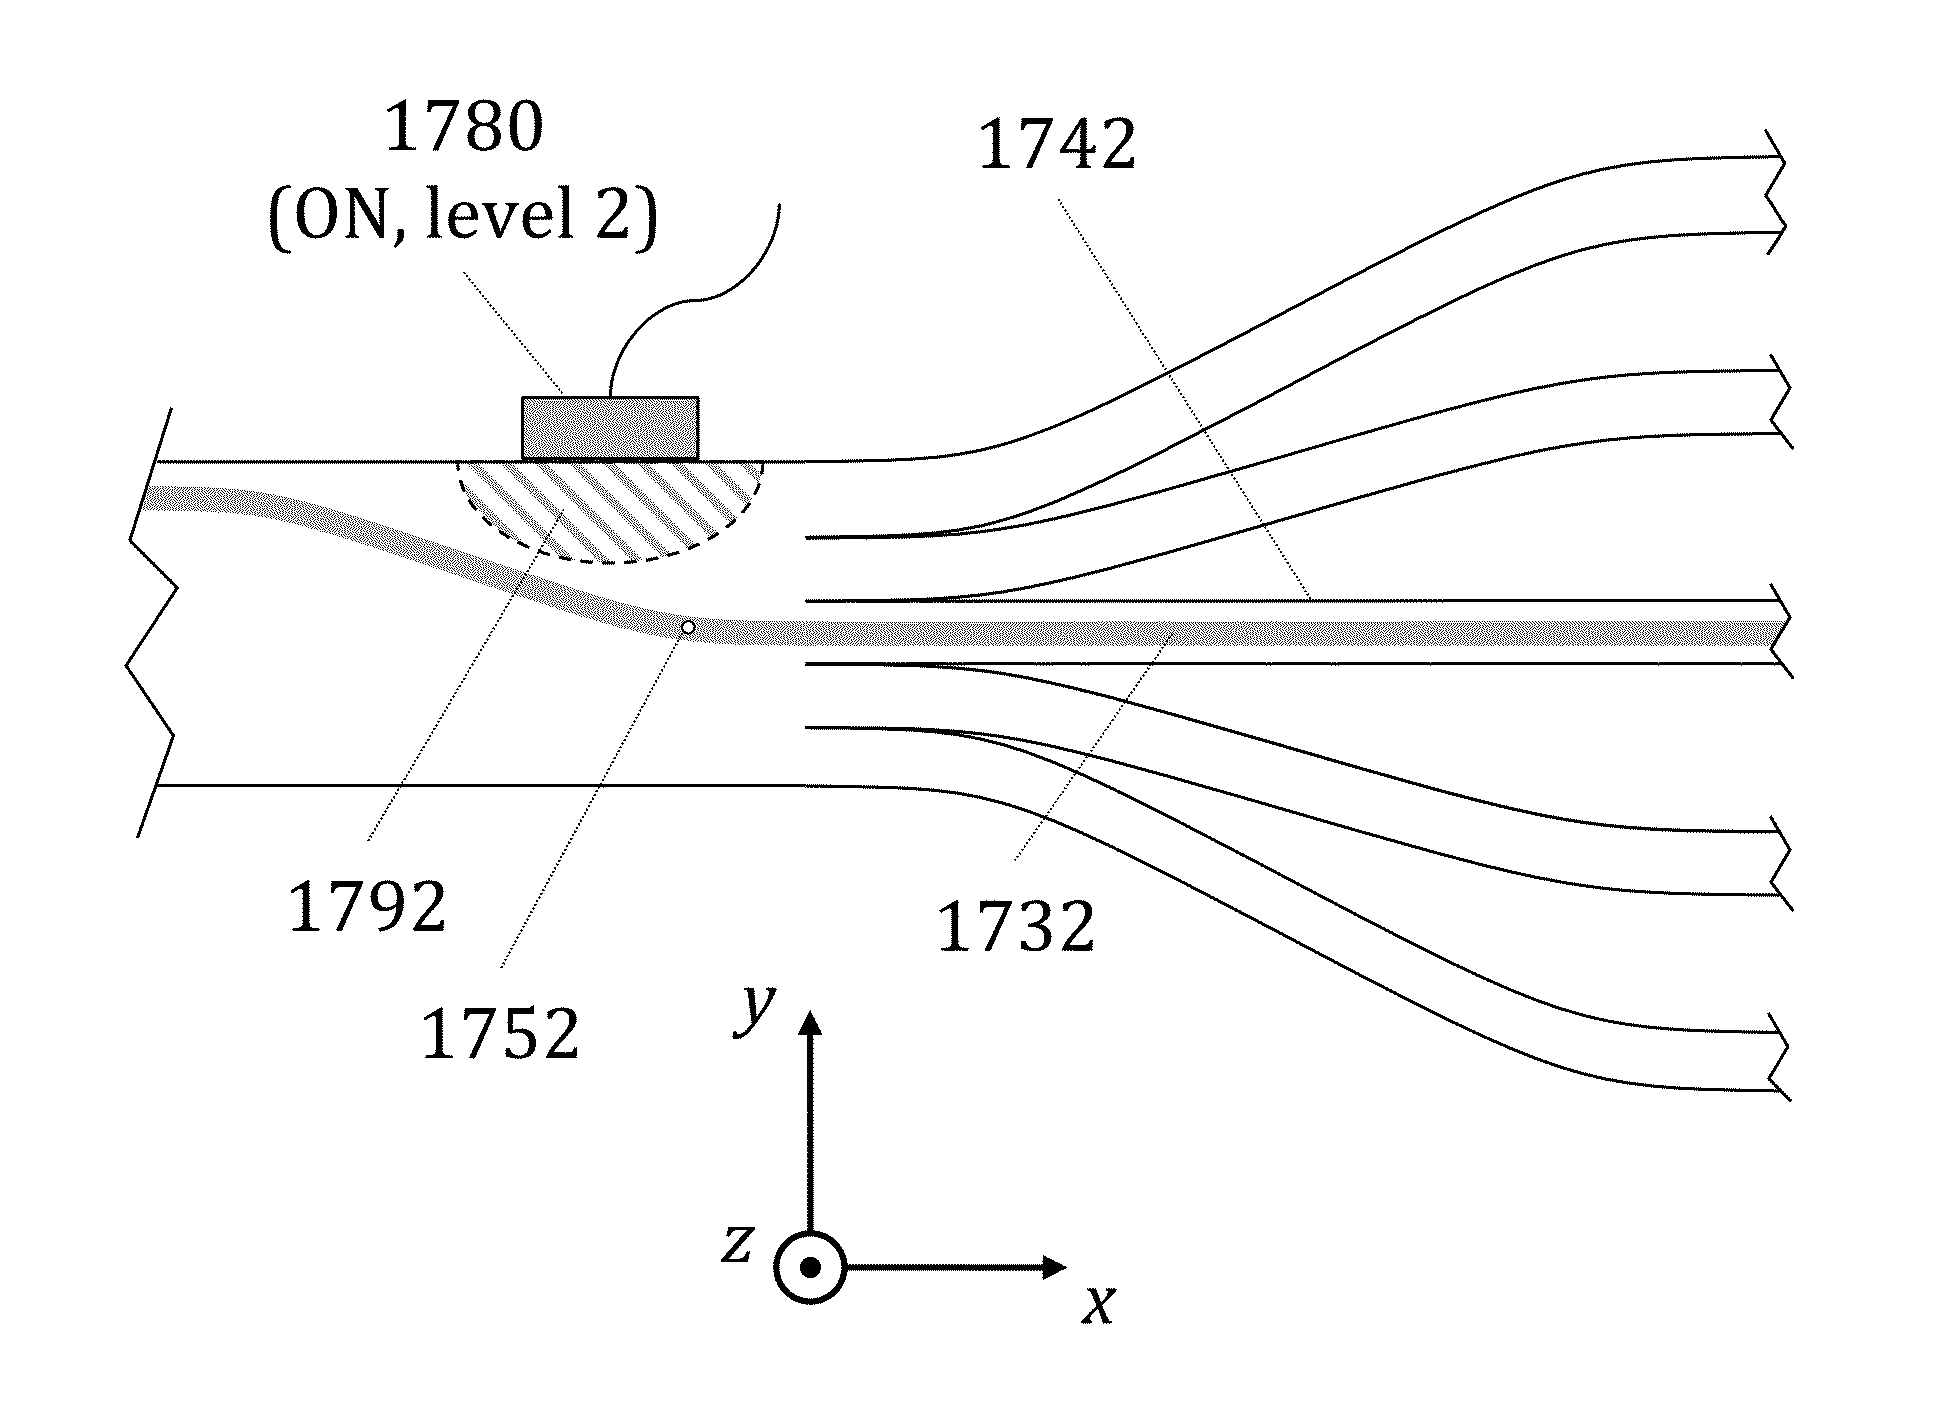 Particle Analysis and Sorting Apparatus and Methods